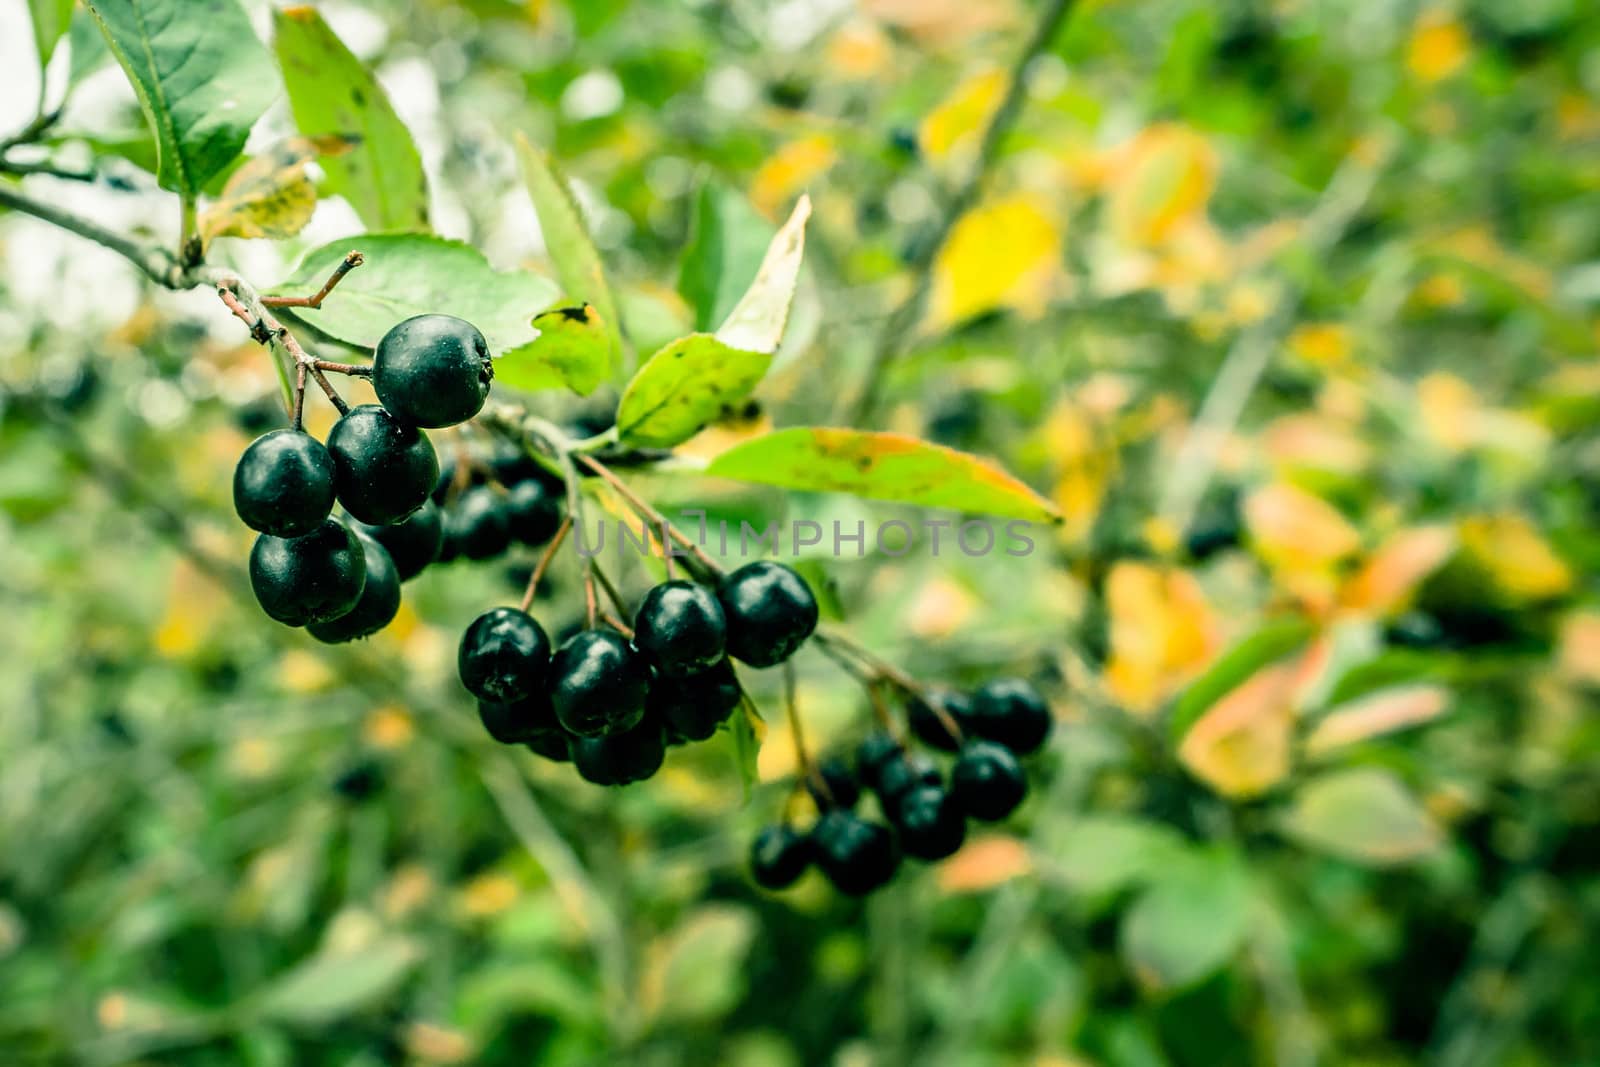 Aronia Melanocarpa hanging on a branch in nature